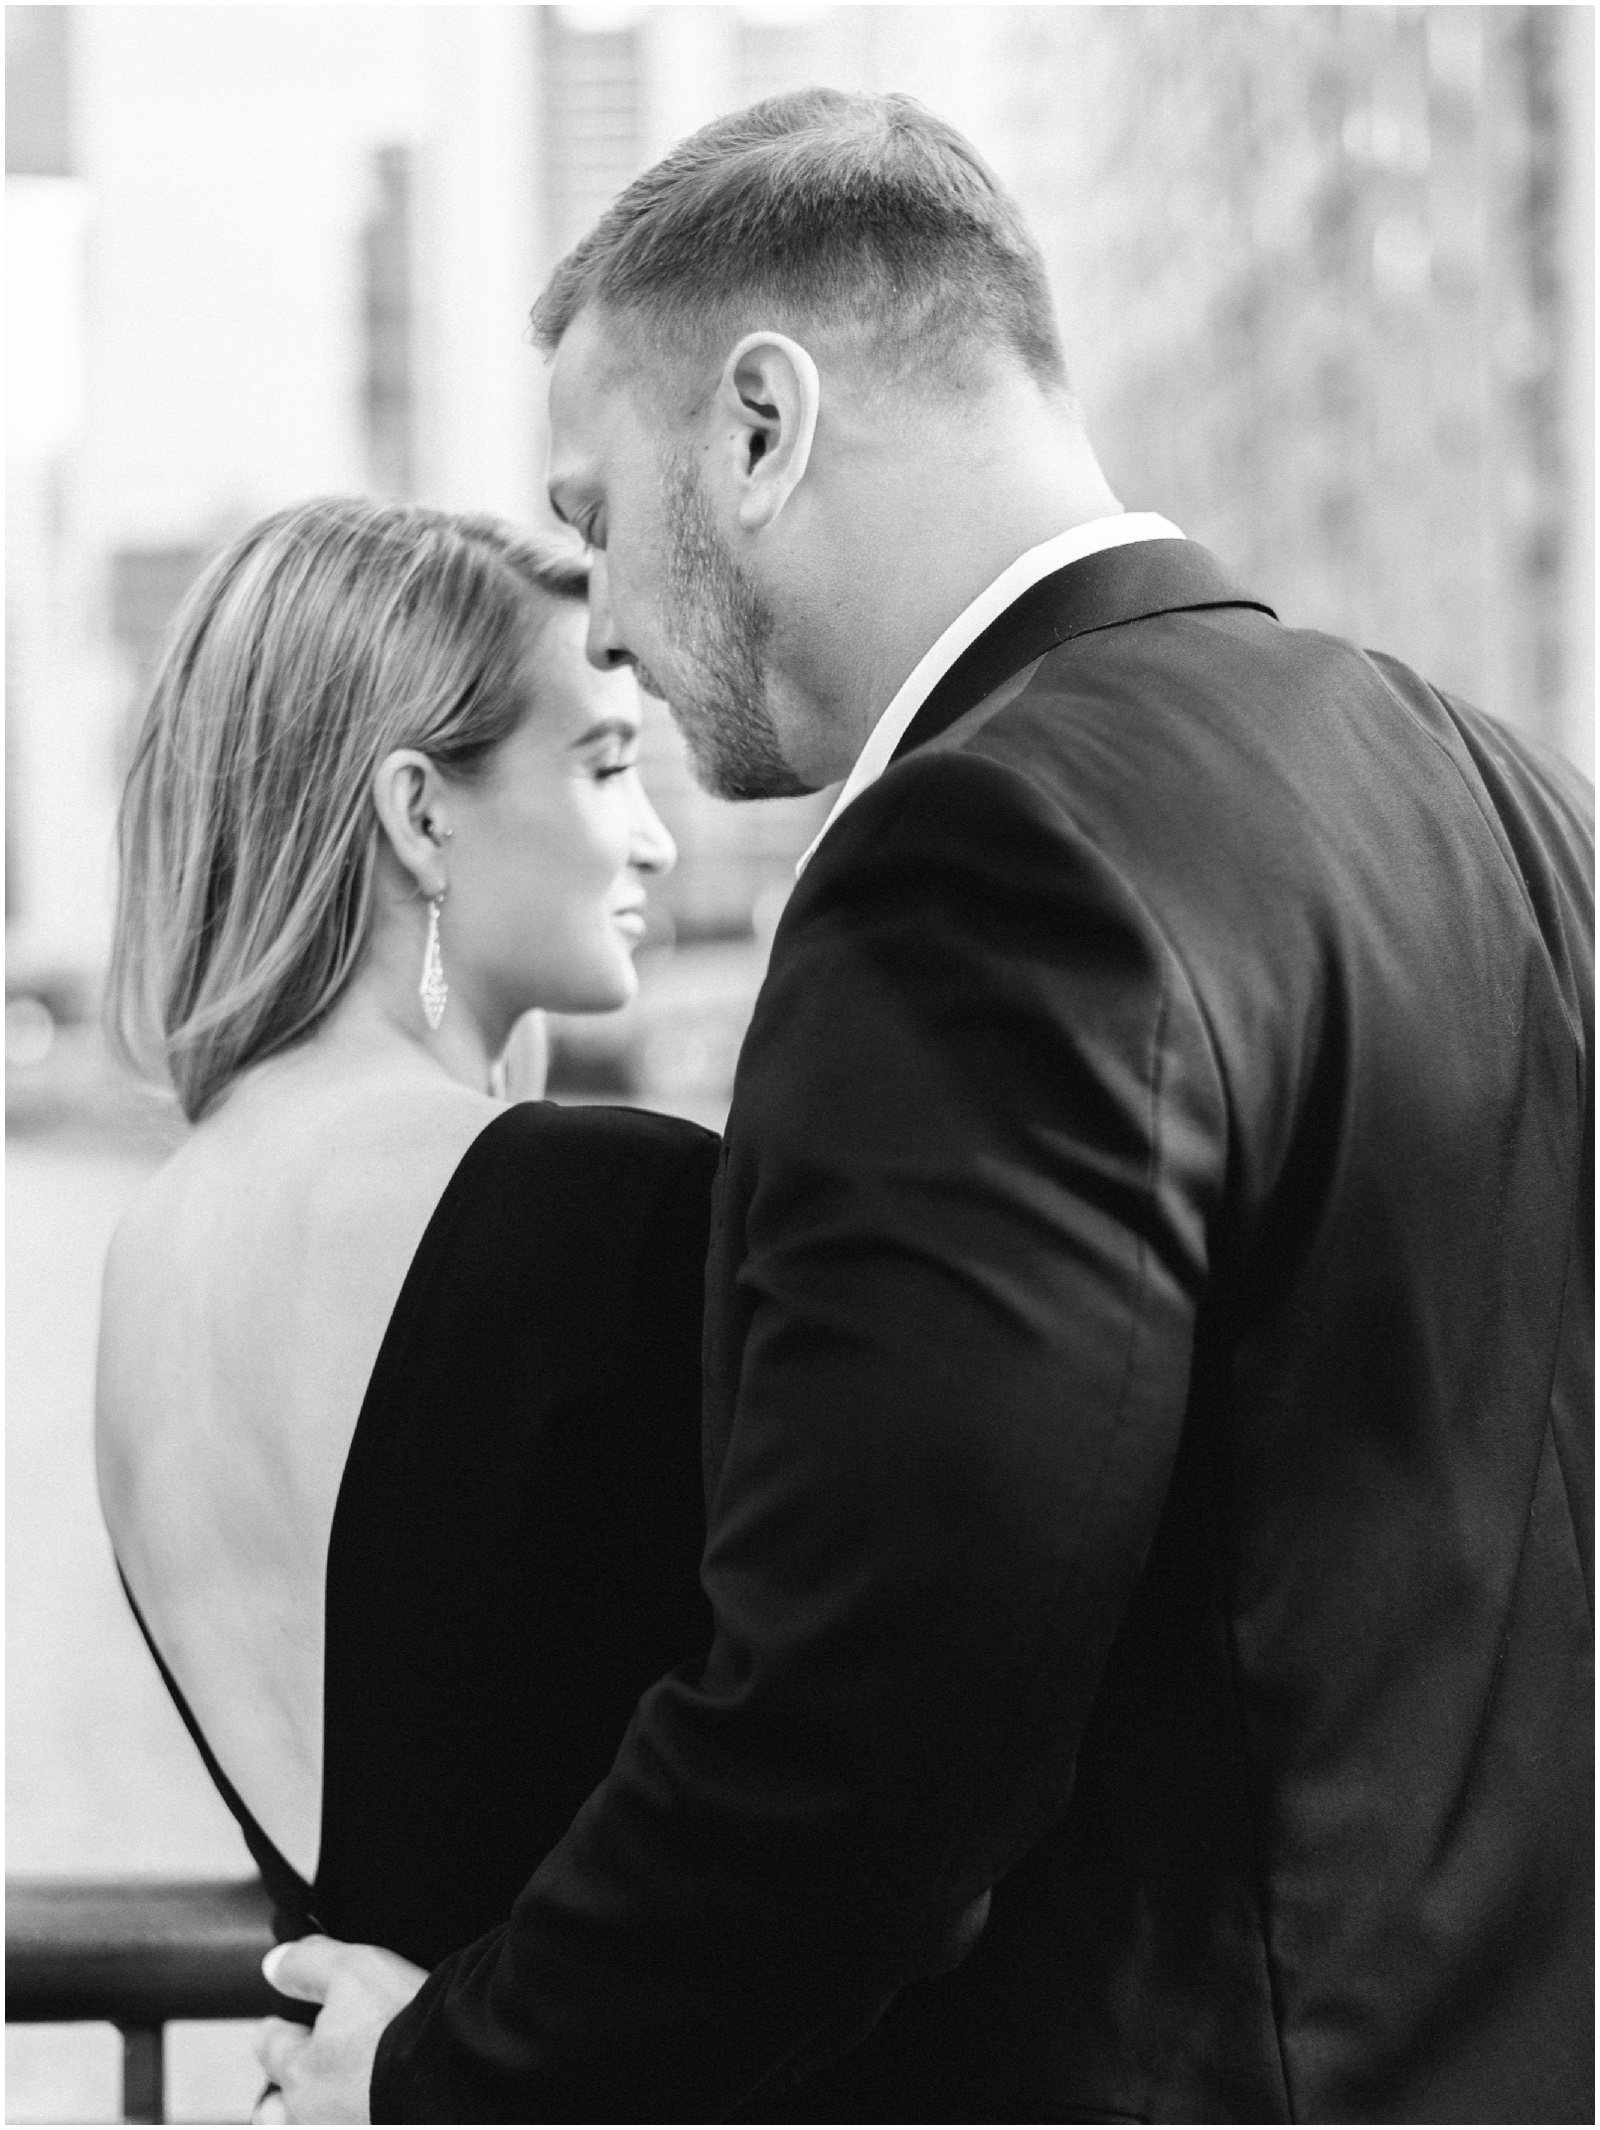 groom with hand on fiance's back wearing black and white elegant outfits